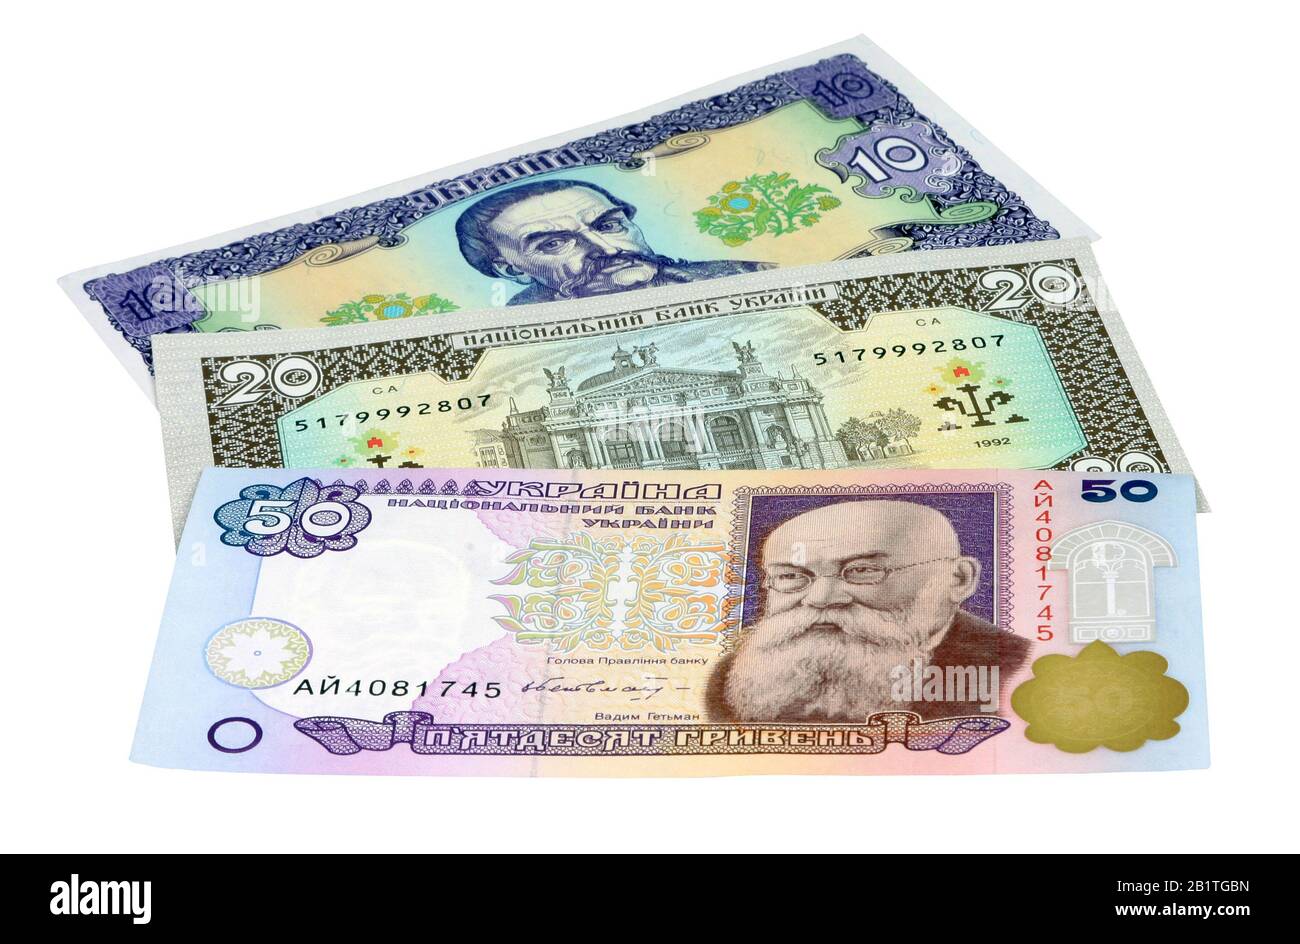 1990s national currency of Ukraine 10 Hryvnias (1992 banknote) , 20 Hryvnias (1992 banknote), and 50 Hryvnias (1996 banknote) - The front of 50 Hryvni Stock Photo